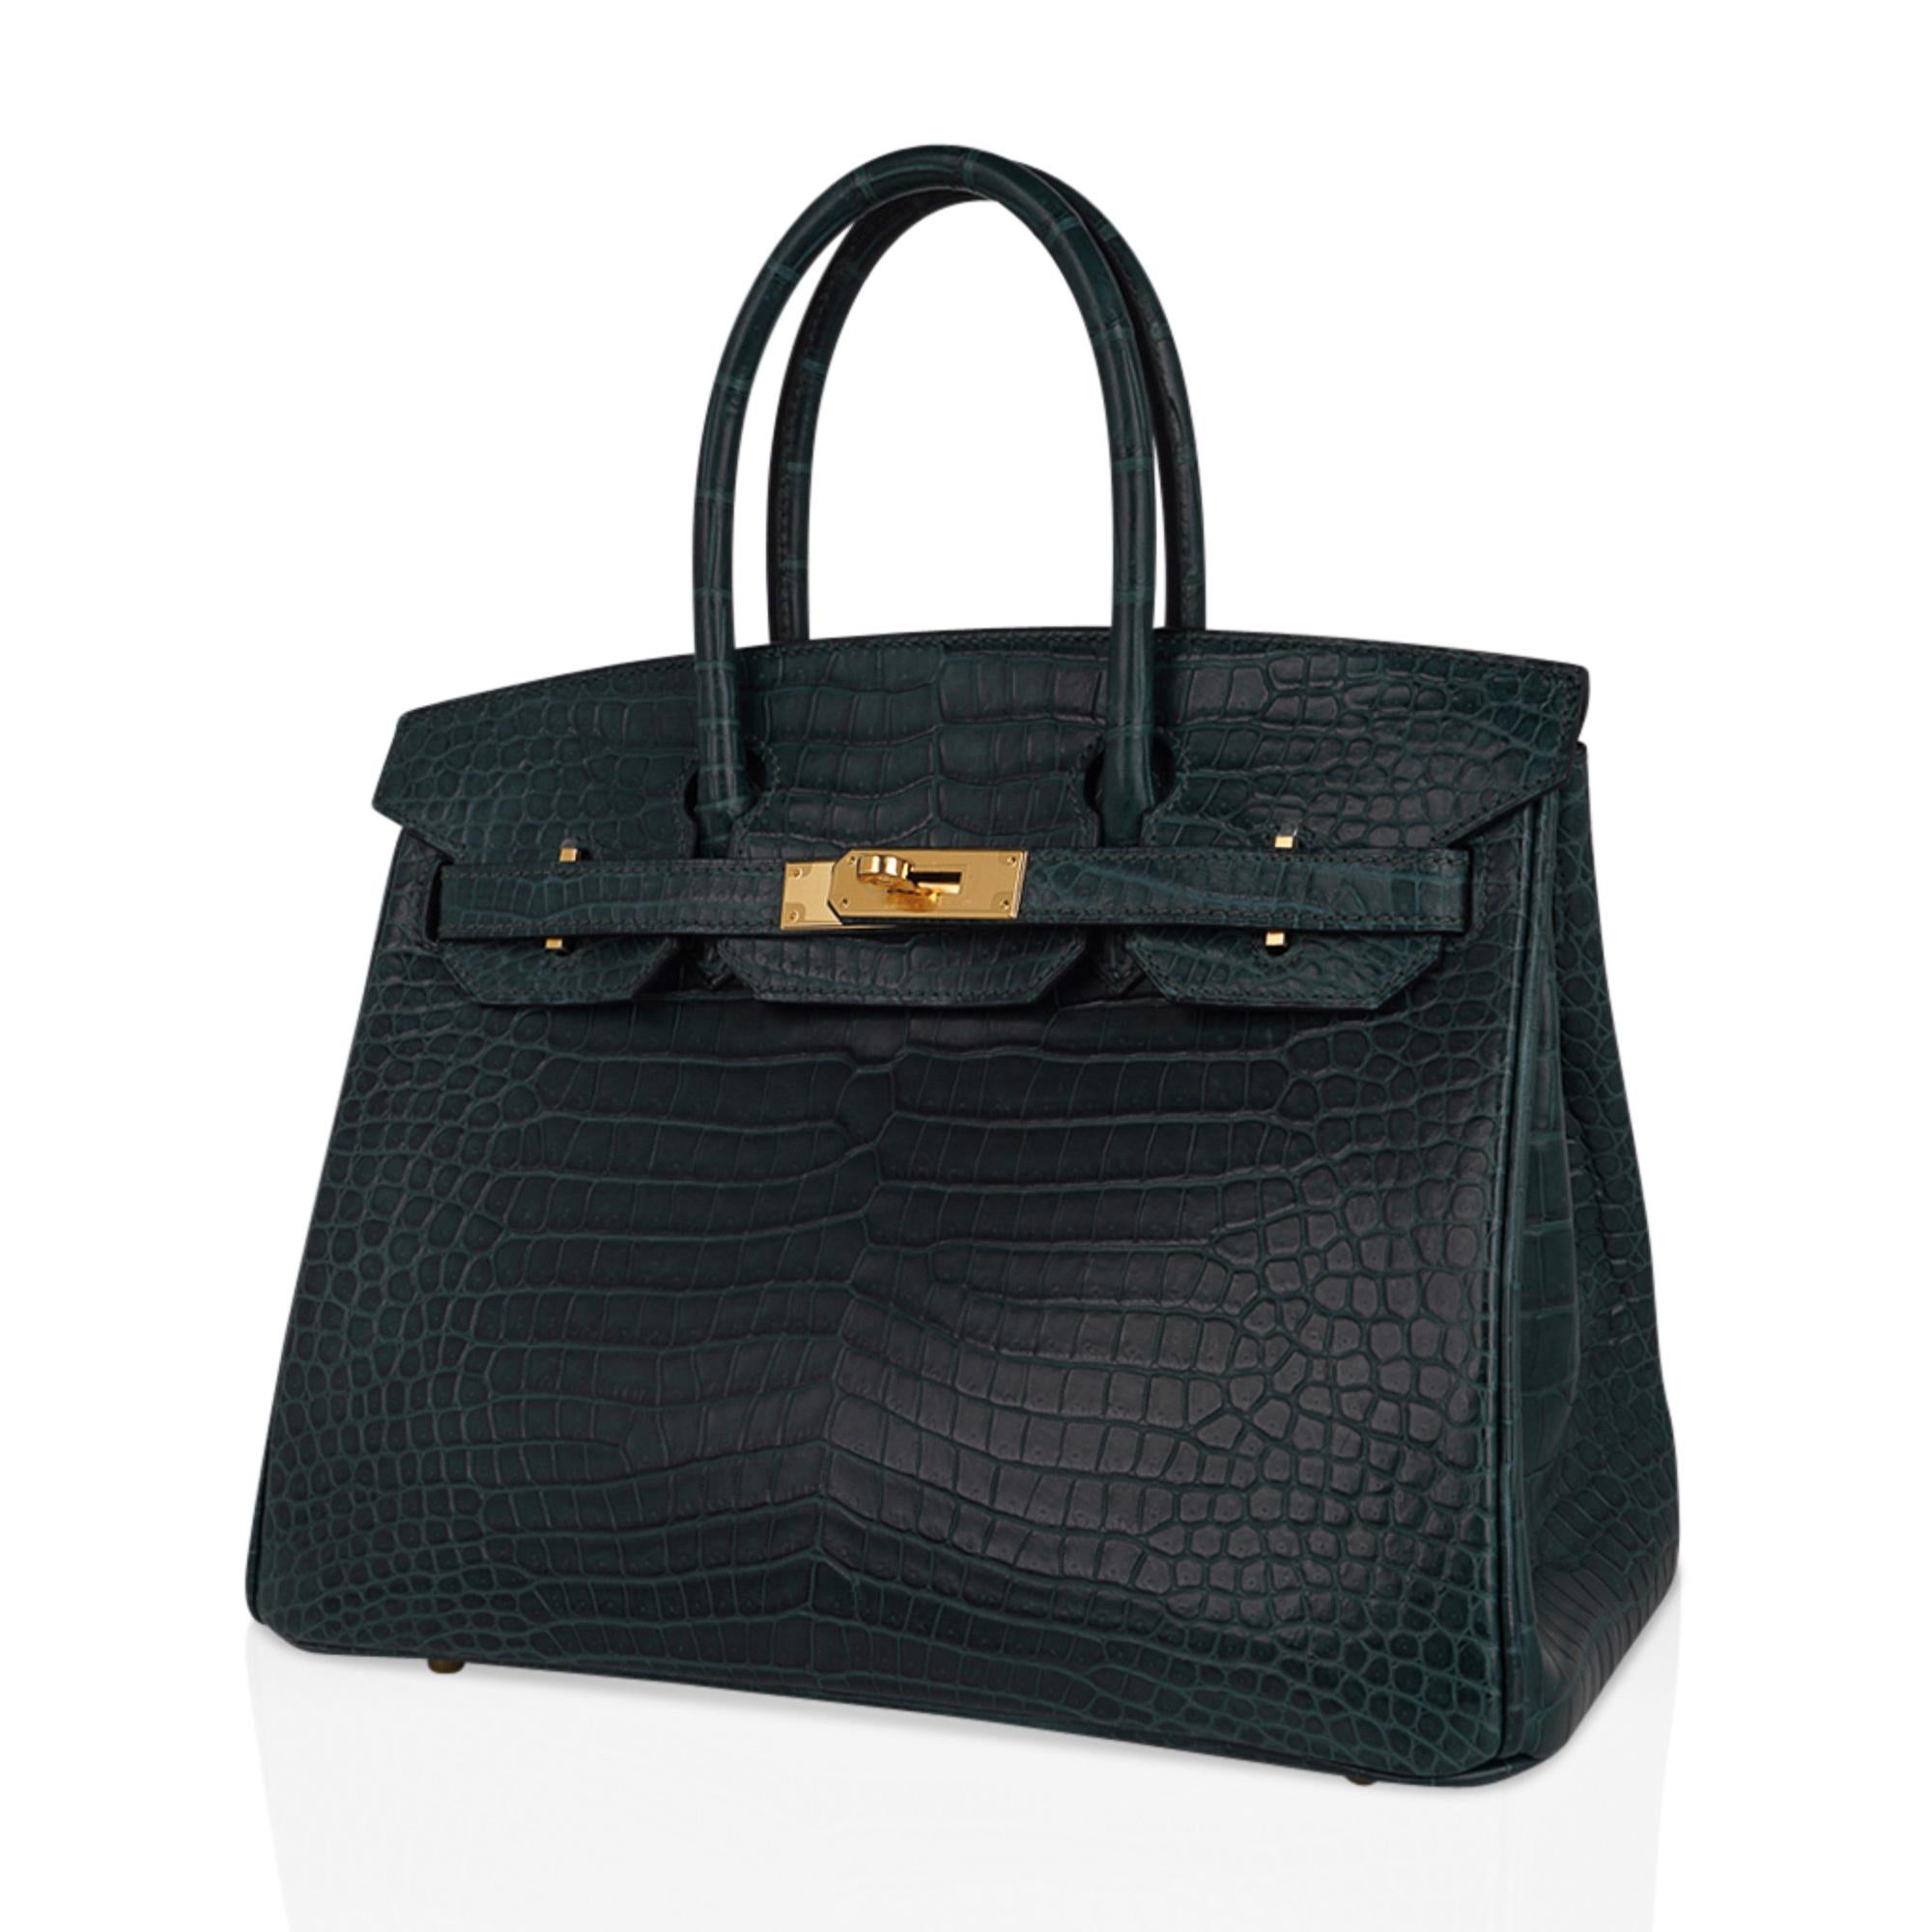 Mightychic offers an exquisite Hermes Birkin 30 bag is featured in in lush deep Vert Fonce Porosus Crocodile. 
This exotic Hermes Birkin bag in matte Porosus crocodile skin has magnificent scales.
The most exclusive and coveted Porosus skin is